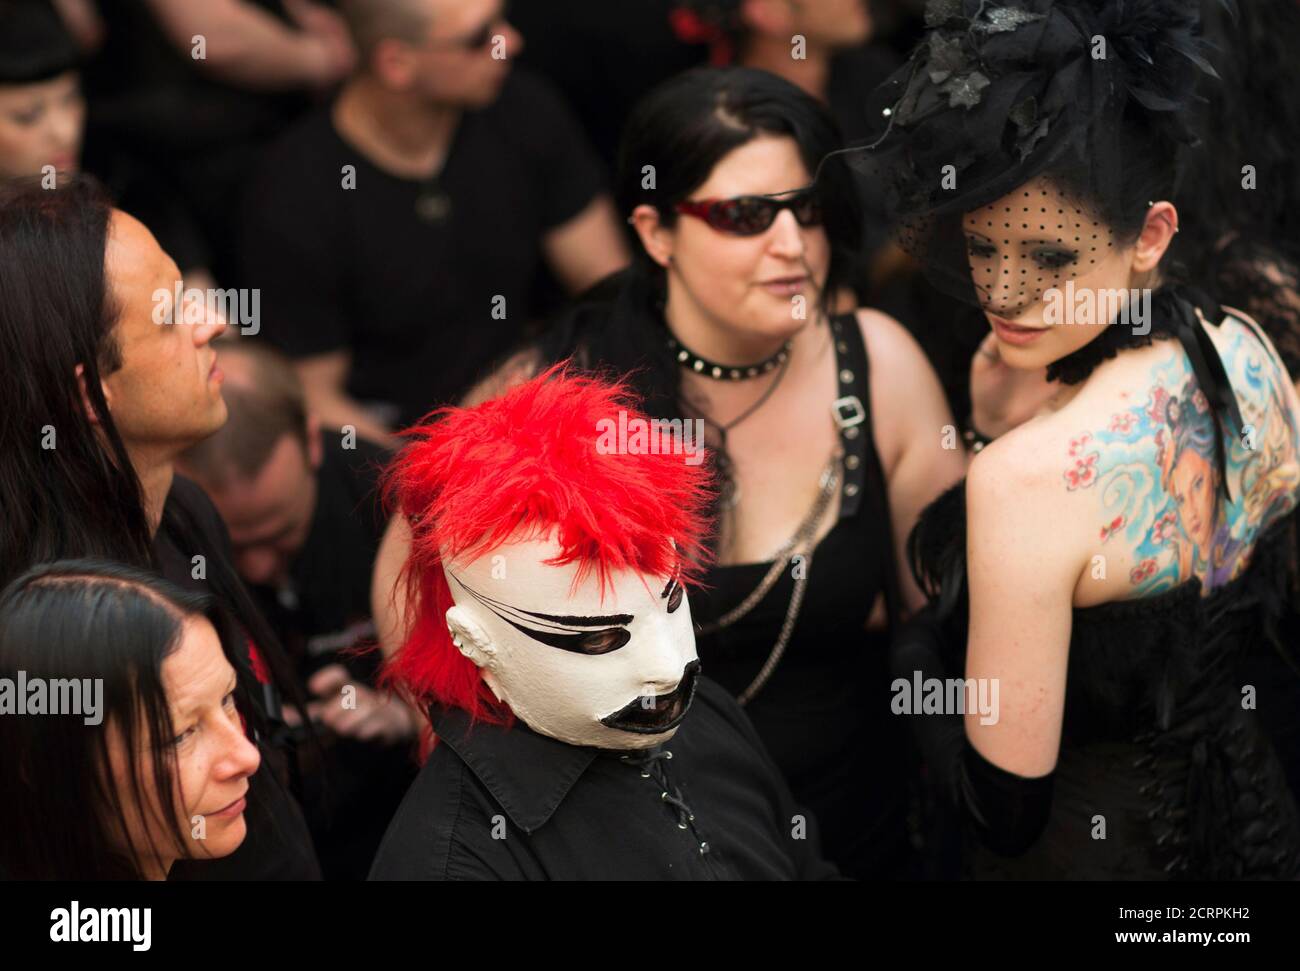 A revellers wears a plaster mask during concert at the Wave and Goth festival in Leipzig May 26, 2012. The annual festival, known in Germany as Wave-Gotik Treffen, features over 150 bands and artist in venues all over the city playing Gothic rock and other styles of the dark wave music subculture. The event that counts as one of the biggest of its kind attract a regular audience of up to 20,000 the organisers said.  REUTERS/Thomas Peter  (GERMANY - Tags: ENTERTAINMENT) Stock Photo